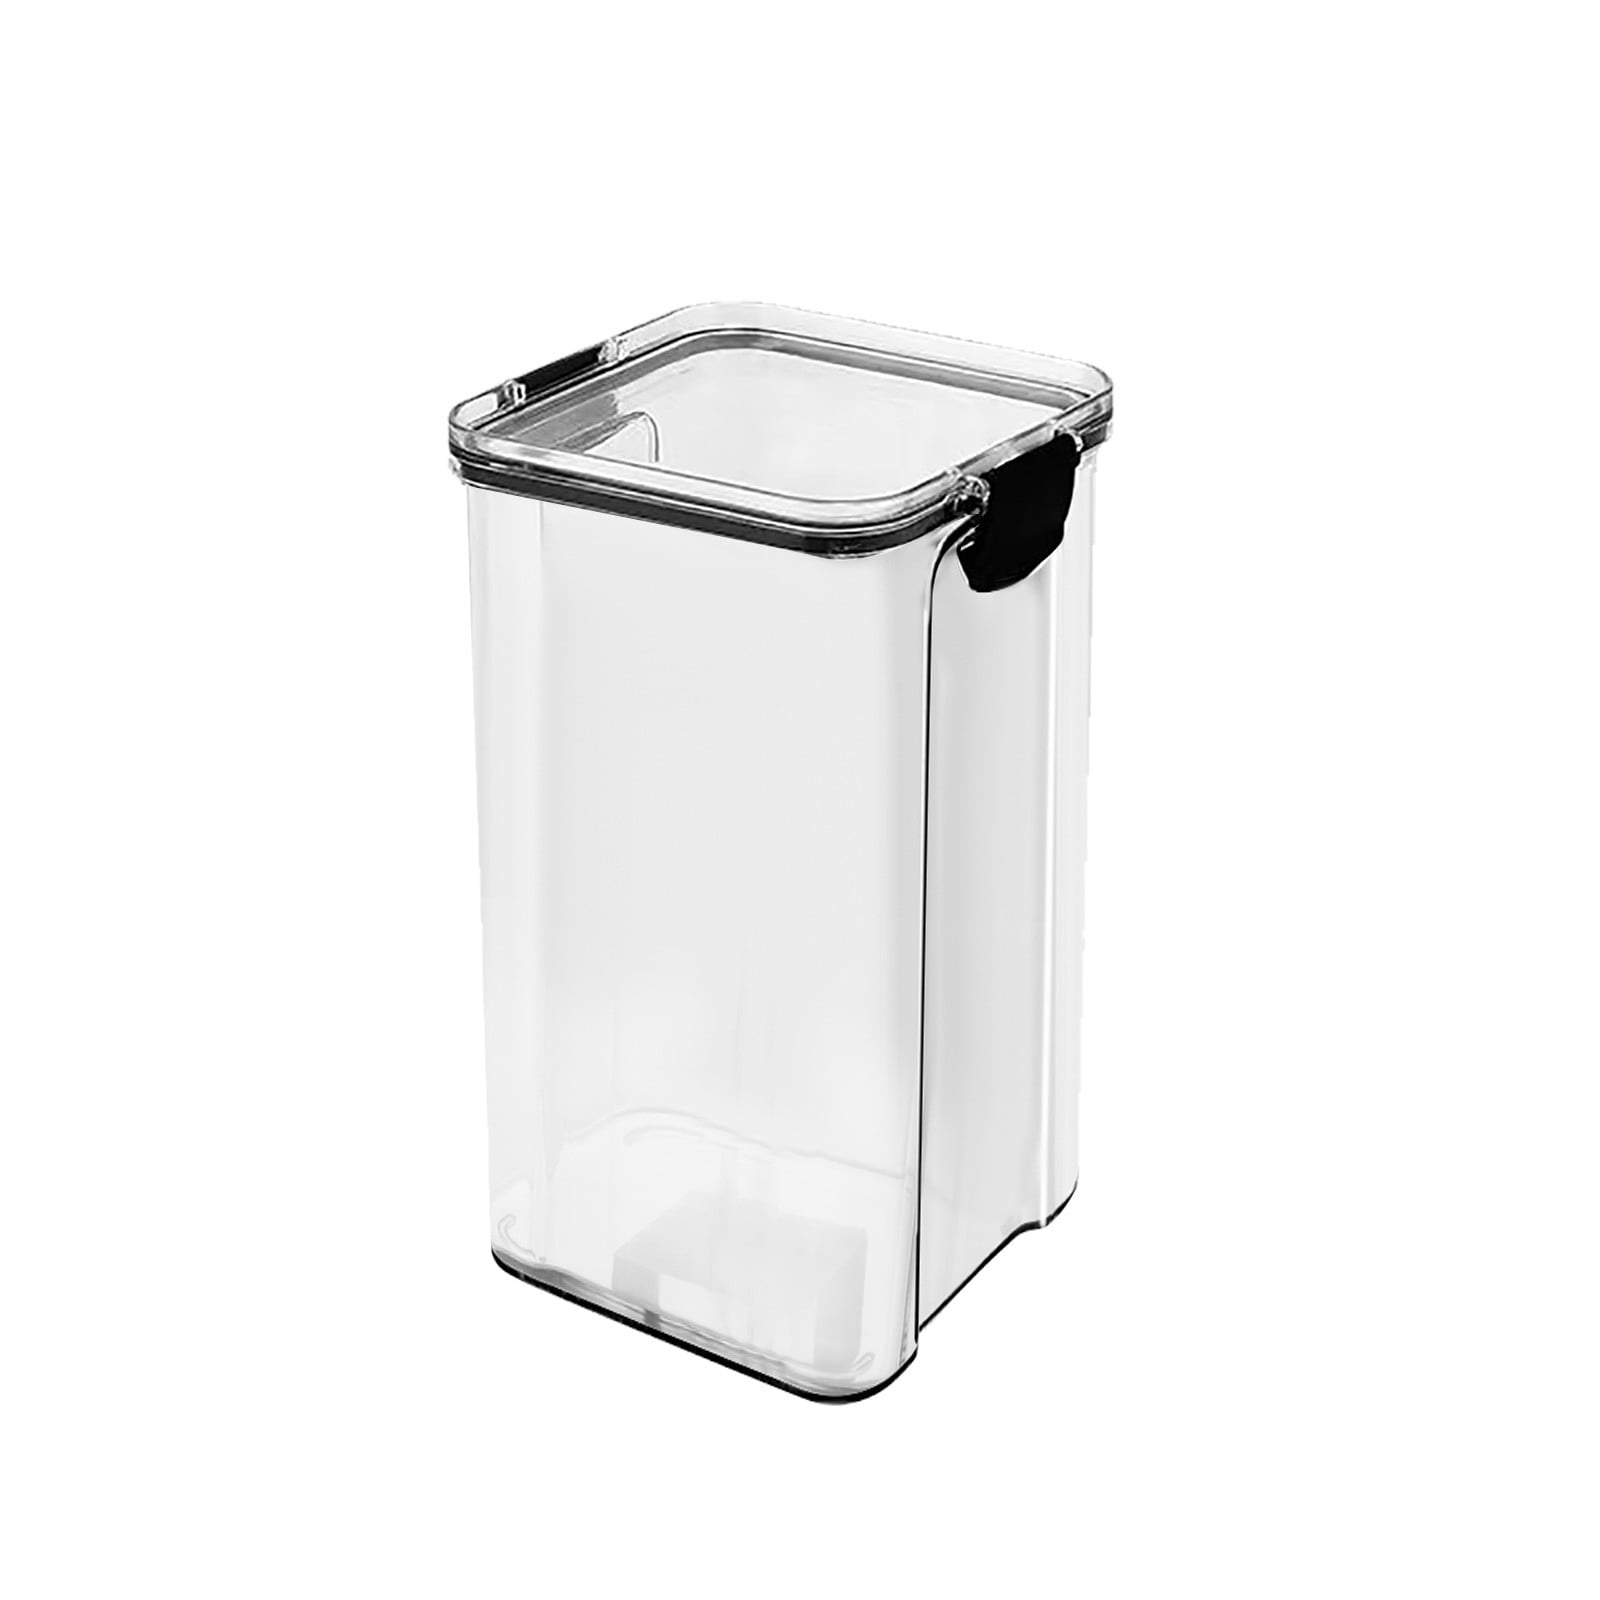 Clear Square Container and Lid - 4-5/8″ x 4-5/8″ x 1-1/8″ - 092C